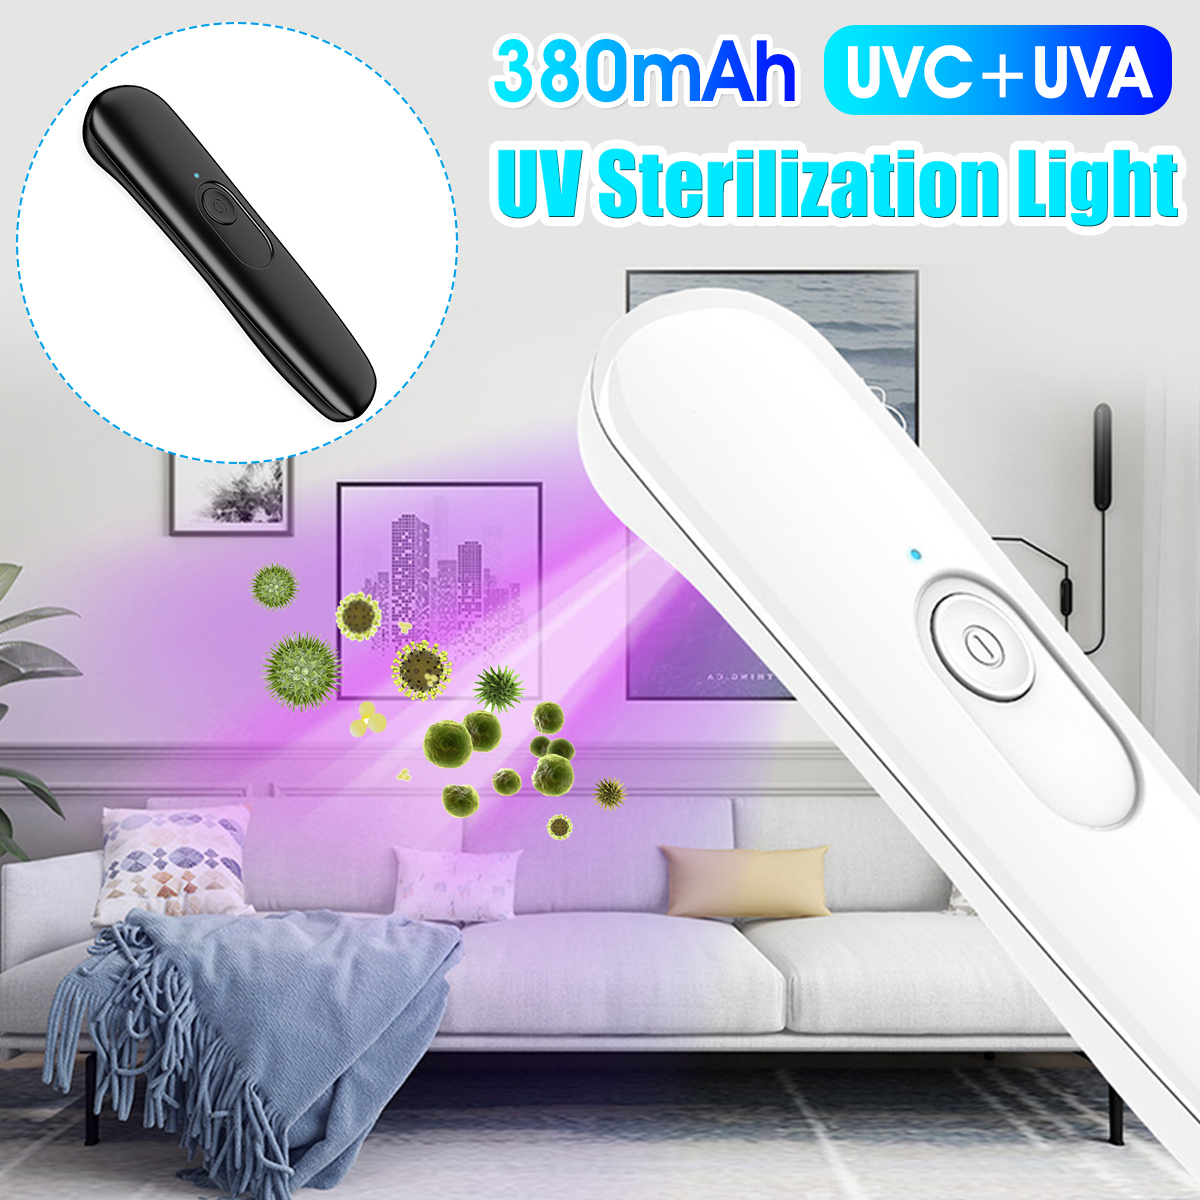 999-Sterilization-Rate-USB-Rechargeable-Mini-Portable-Ultraviolet-Handheld-Disinfection-Lamp-UVC-Ger-1700558-1